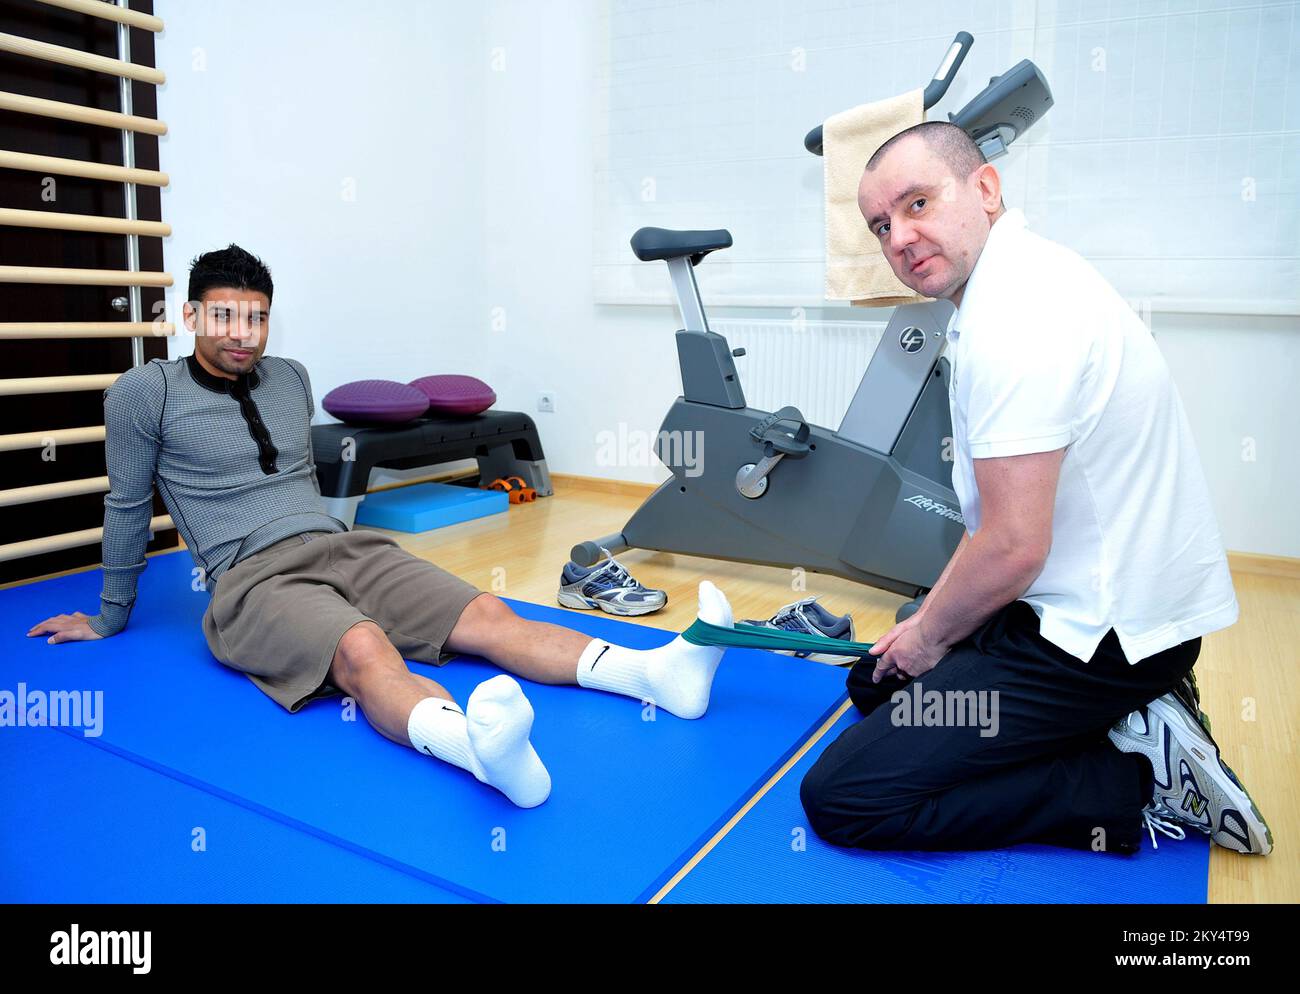 Arsenal's Eduardo da Silva with Physiotherapist Bojan Radanovic who is  helping him recover from his injury sustained from Blackburn Rovers' player  Martin Taylor after a serious foul resulting in Eduardo's broken leg